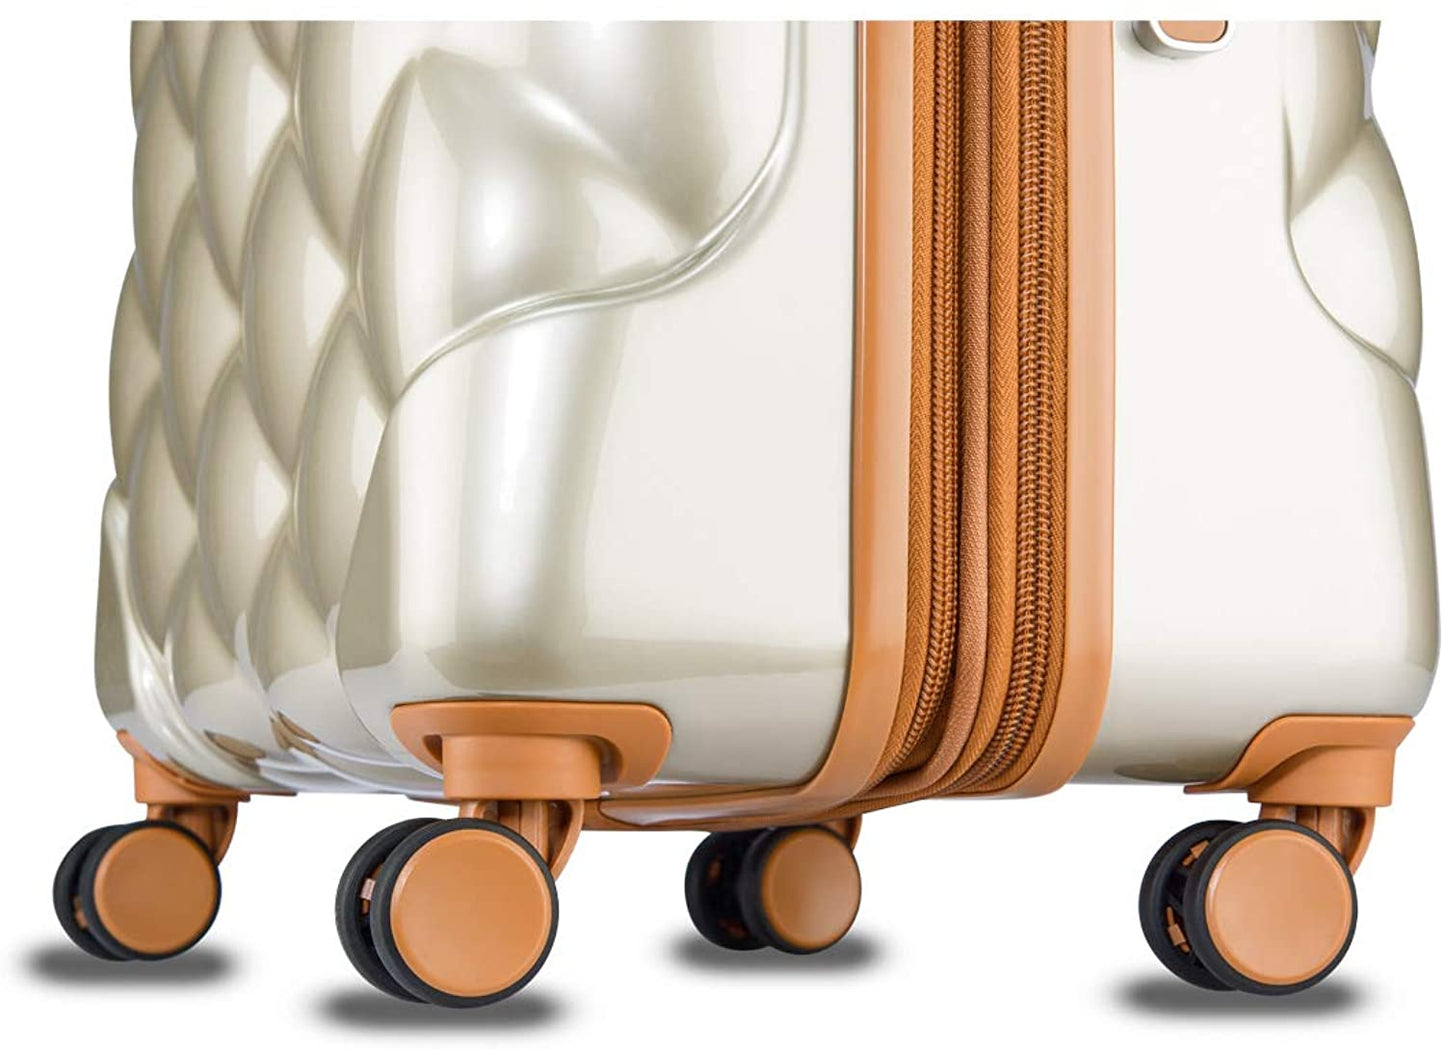 It Luggage St.Tropez Polycarbonate Hard Sided Suitcase  in Dark Champagne 29.3,26.8,21.5,14.1 Set of 3 Inches 25% Expansion and 8 Wheel Trolley Bag